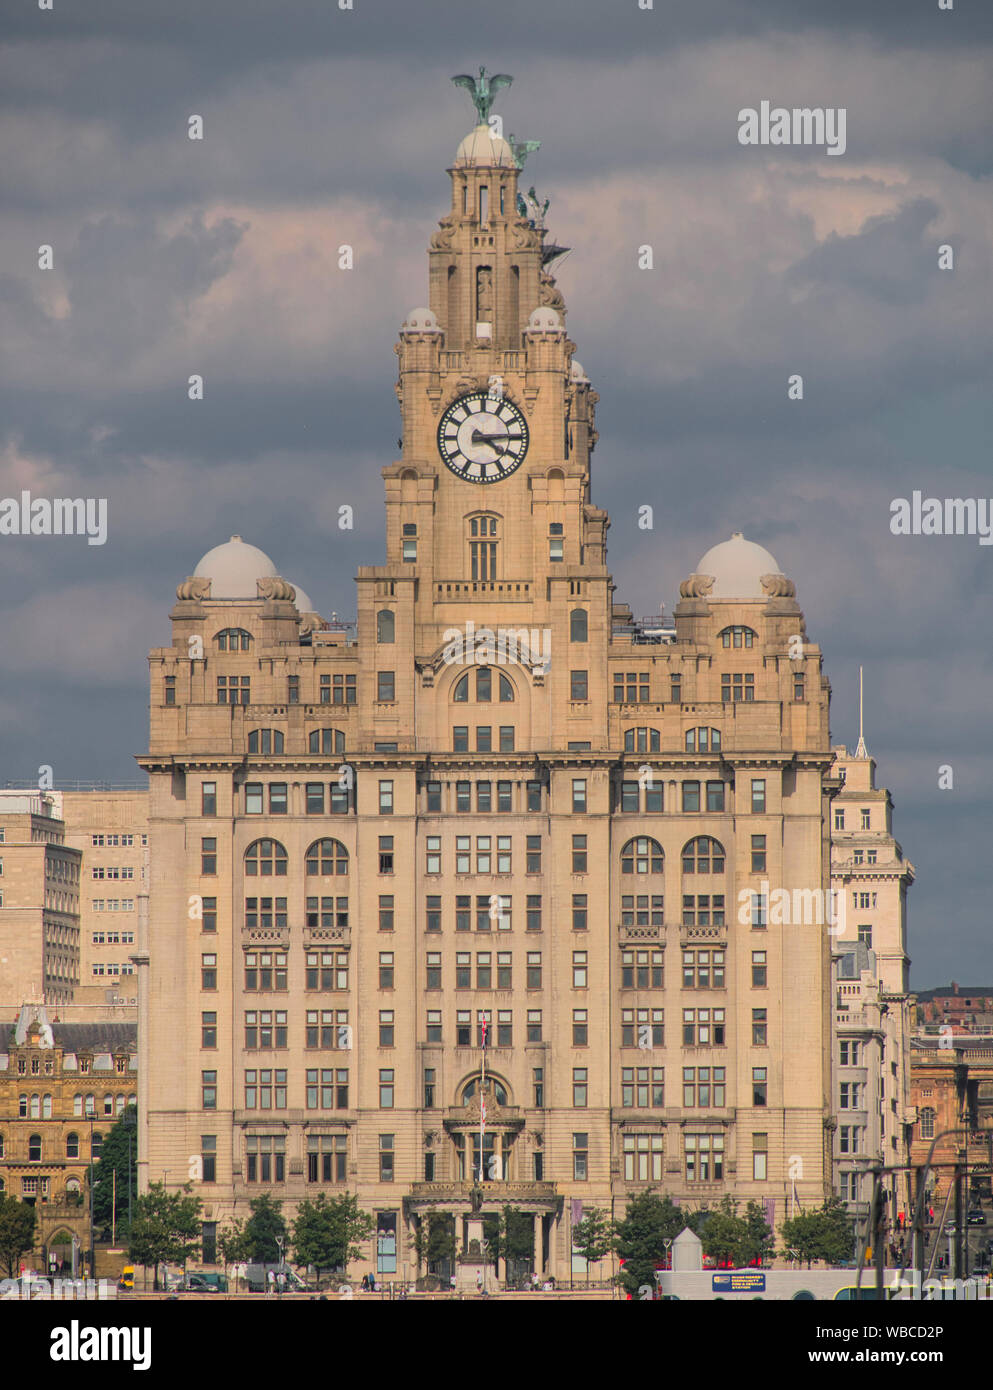 The Royal Liver Building, one of the Three Graces on the historic ...